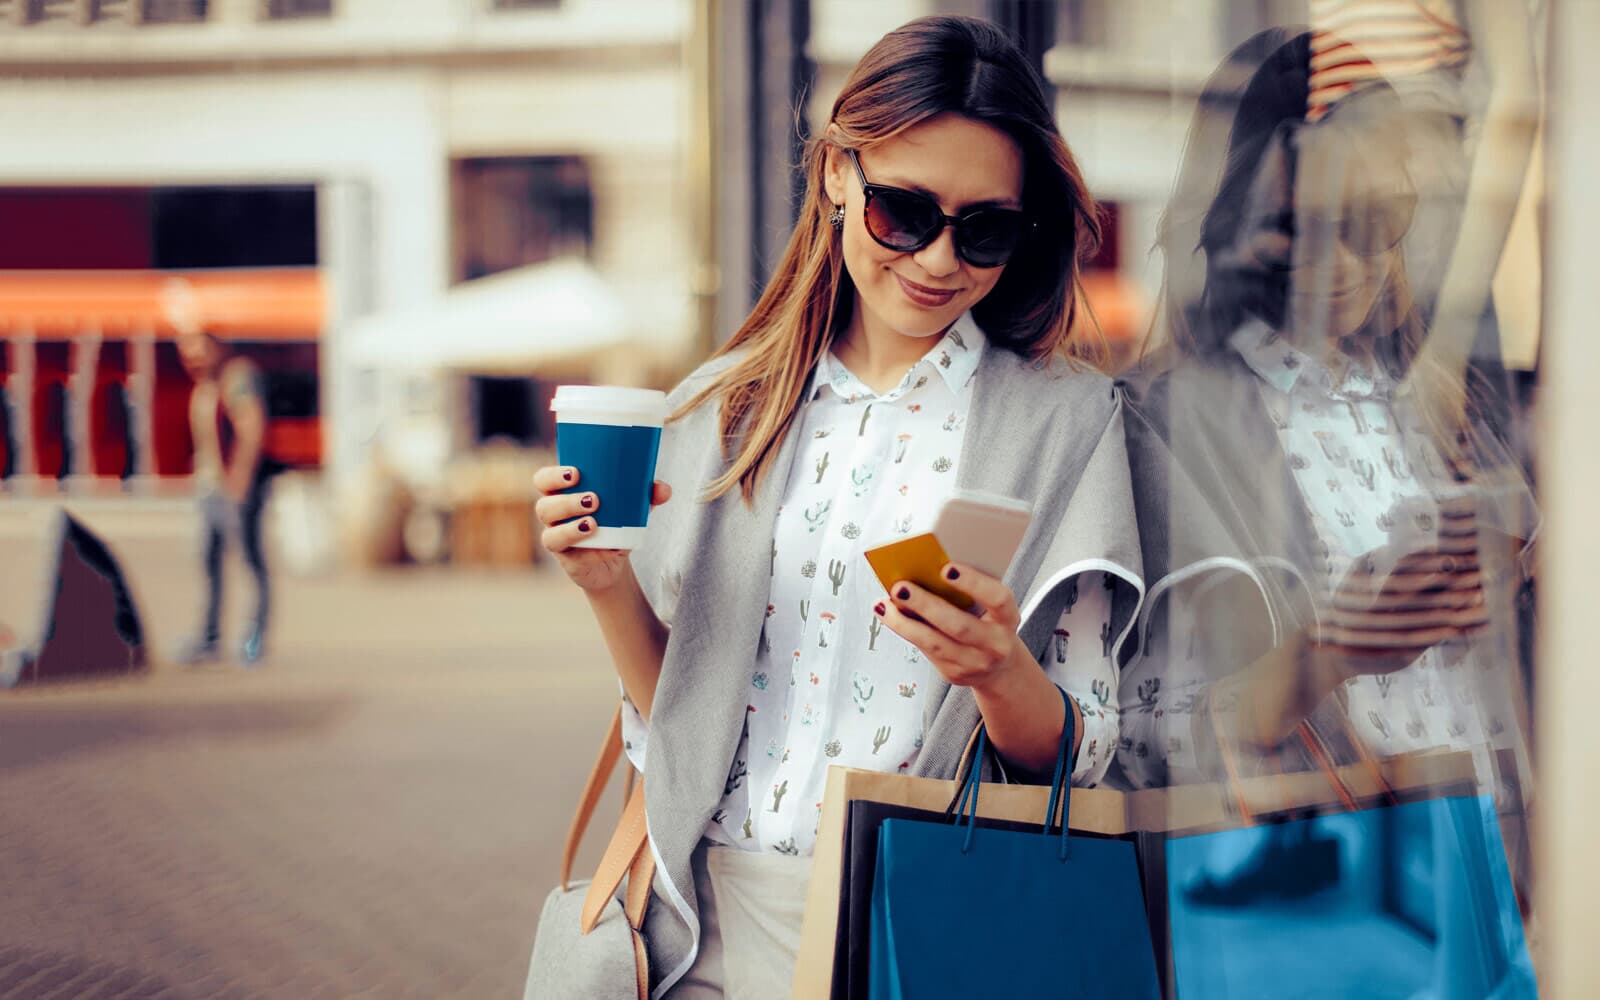 Woman on her phone, holding a to-go cup of coffee and shopping bags